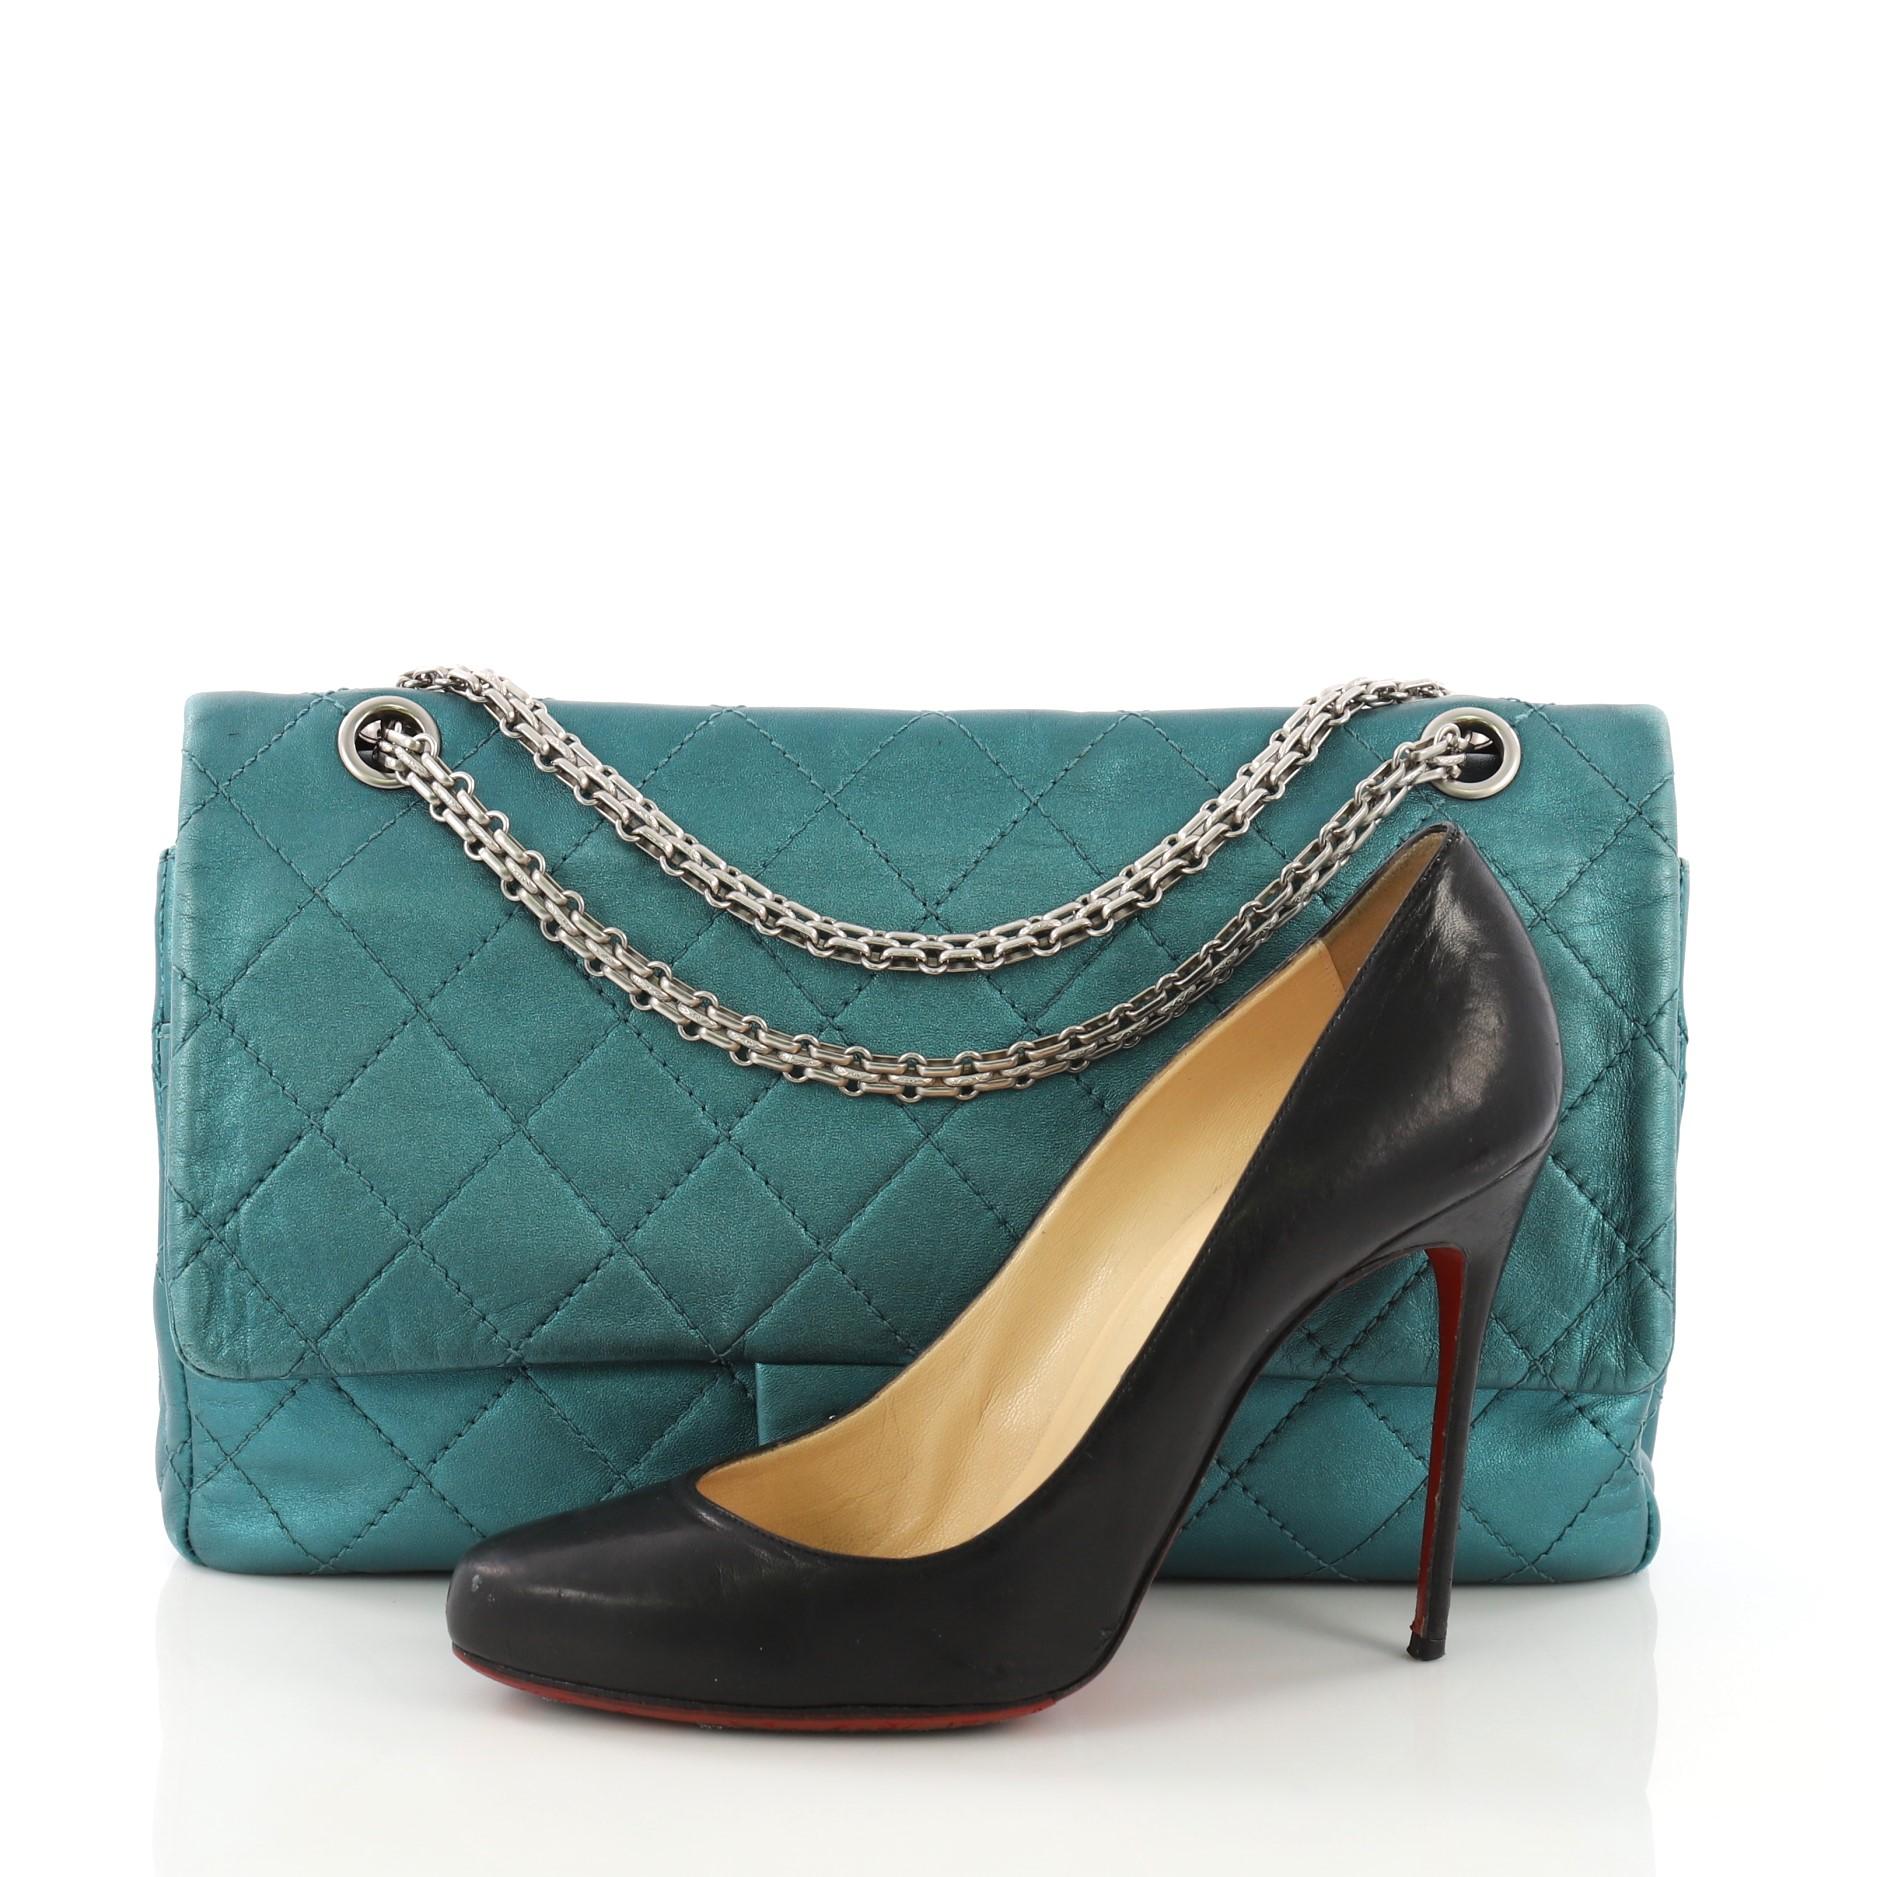 This Chanel Reissue 2.55 Handbag Quilted Metallic Aged Calfskin 227, crafted in teal quilted metallic aged calfskin, features reissue chain shoulder strap, front flap, and matte silver-tone hardware. Its mademoiselle turn-lock closure opens to a